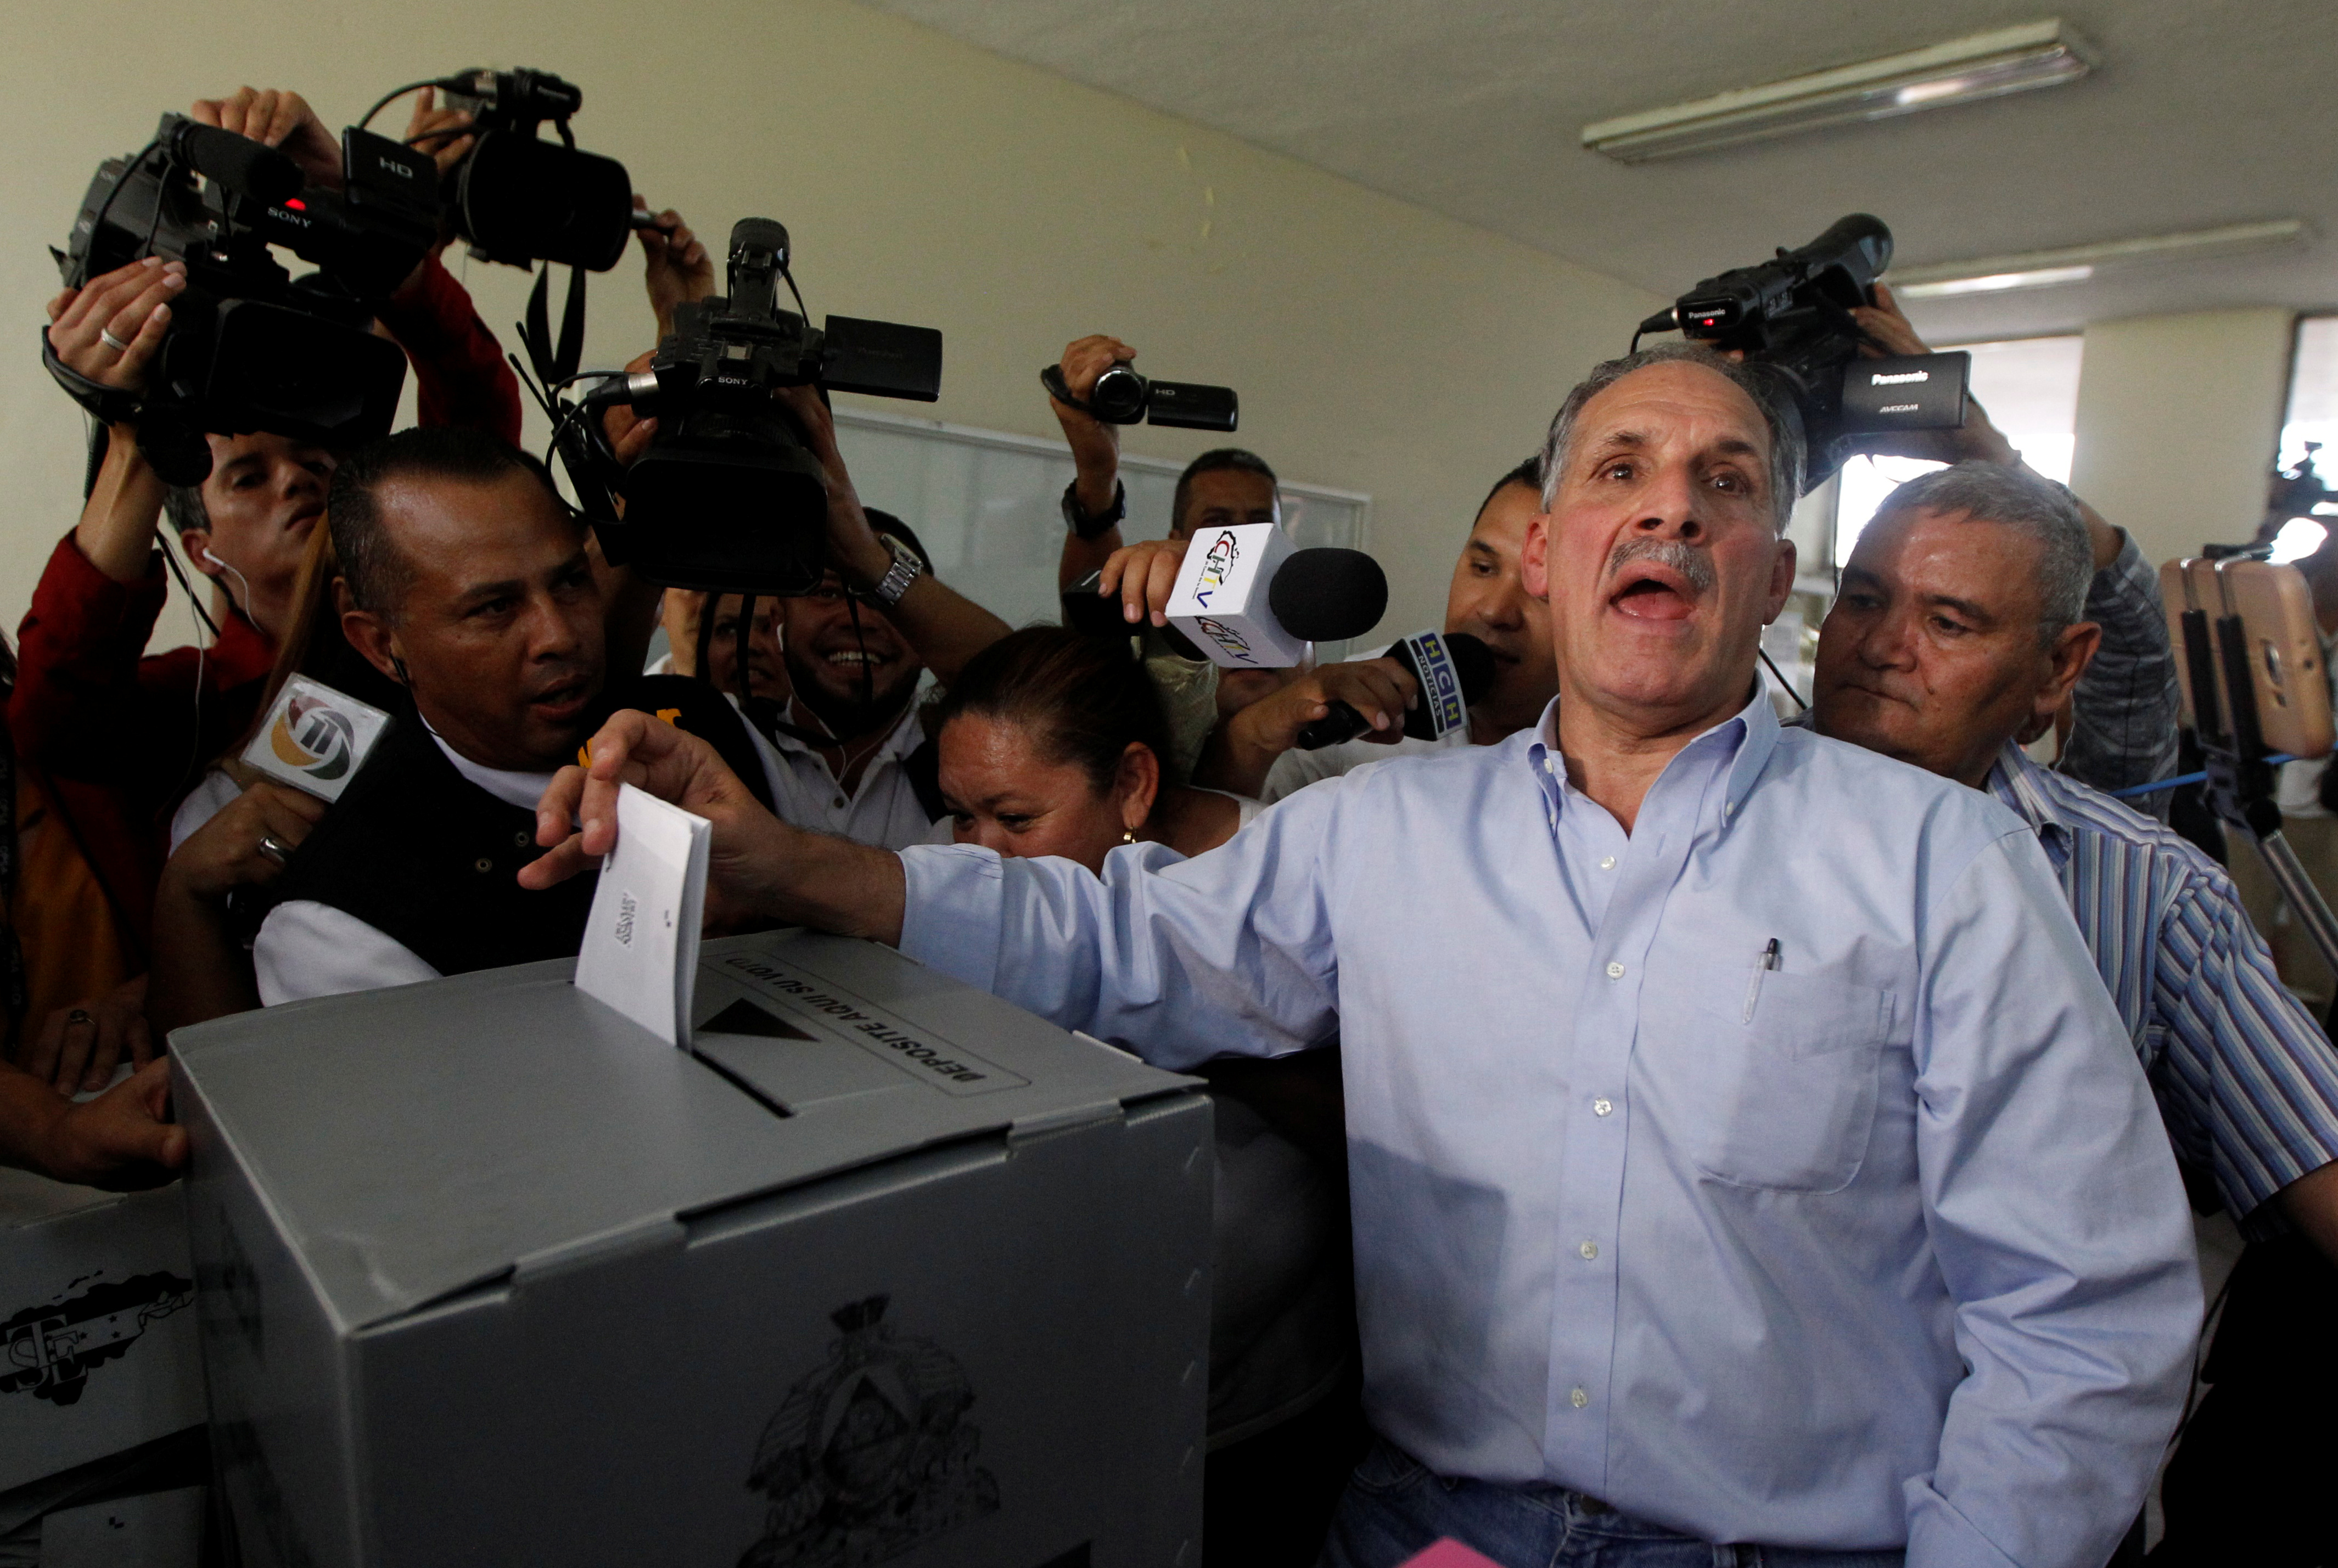 Tegucigalpa's mayor Nasry Juan Asfura Zablah casts his ballot during the primary elections, in a public school used as a polling station in Tegucigalpa